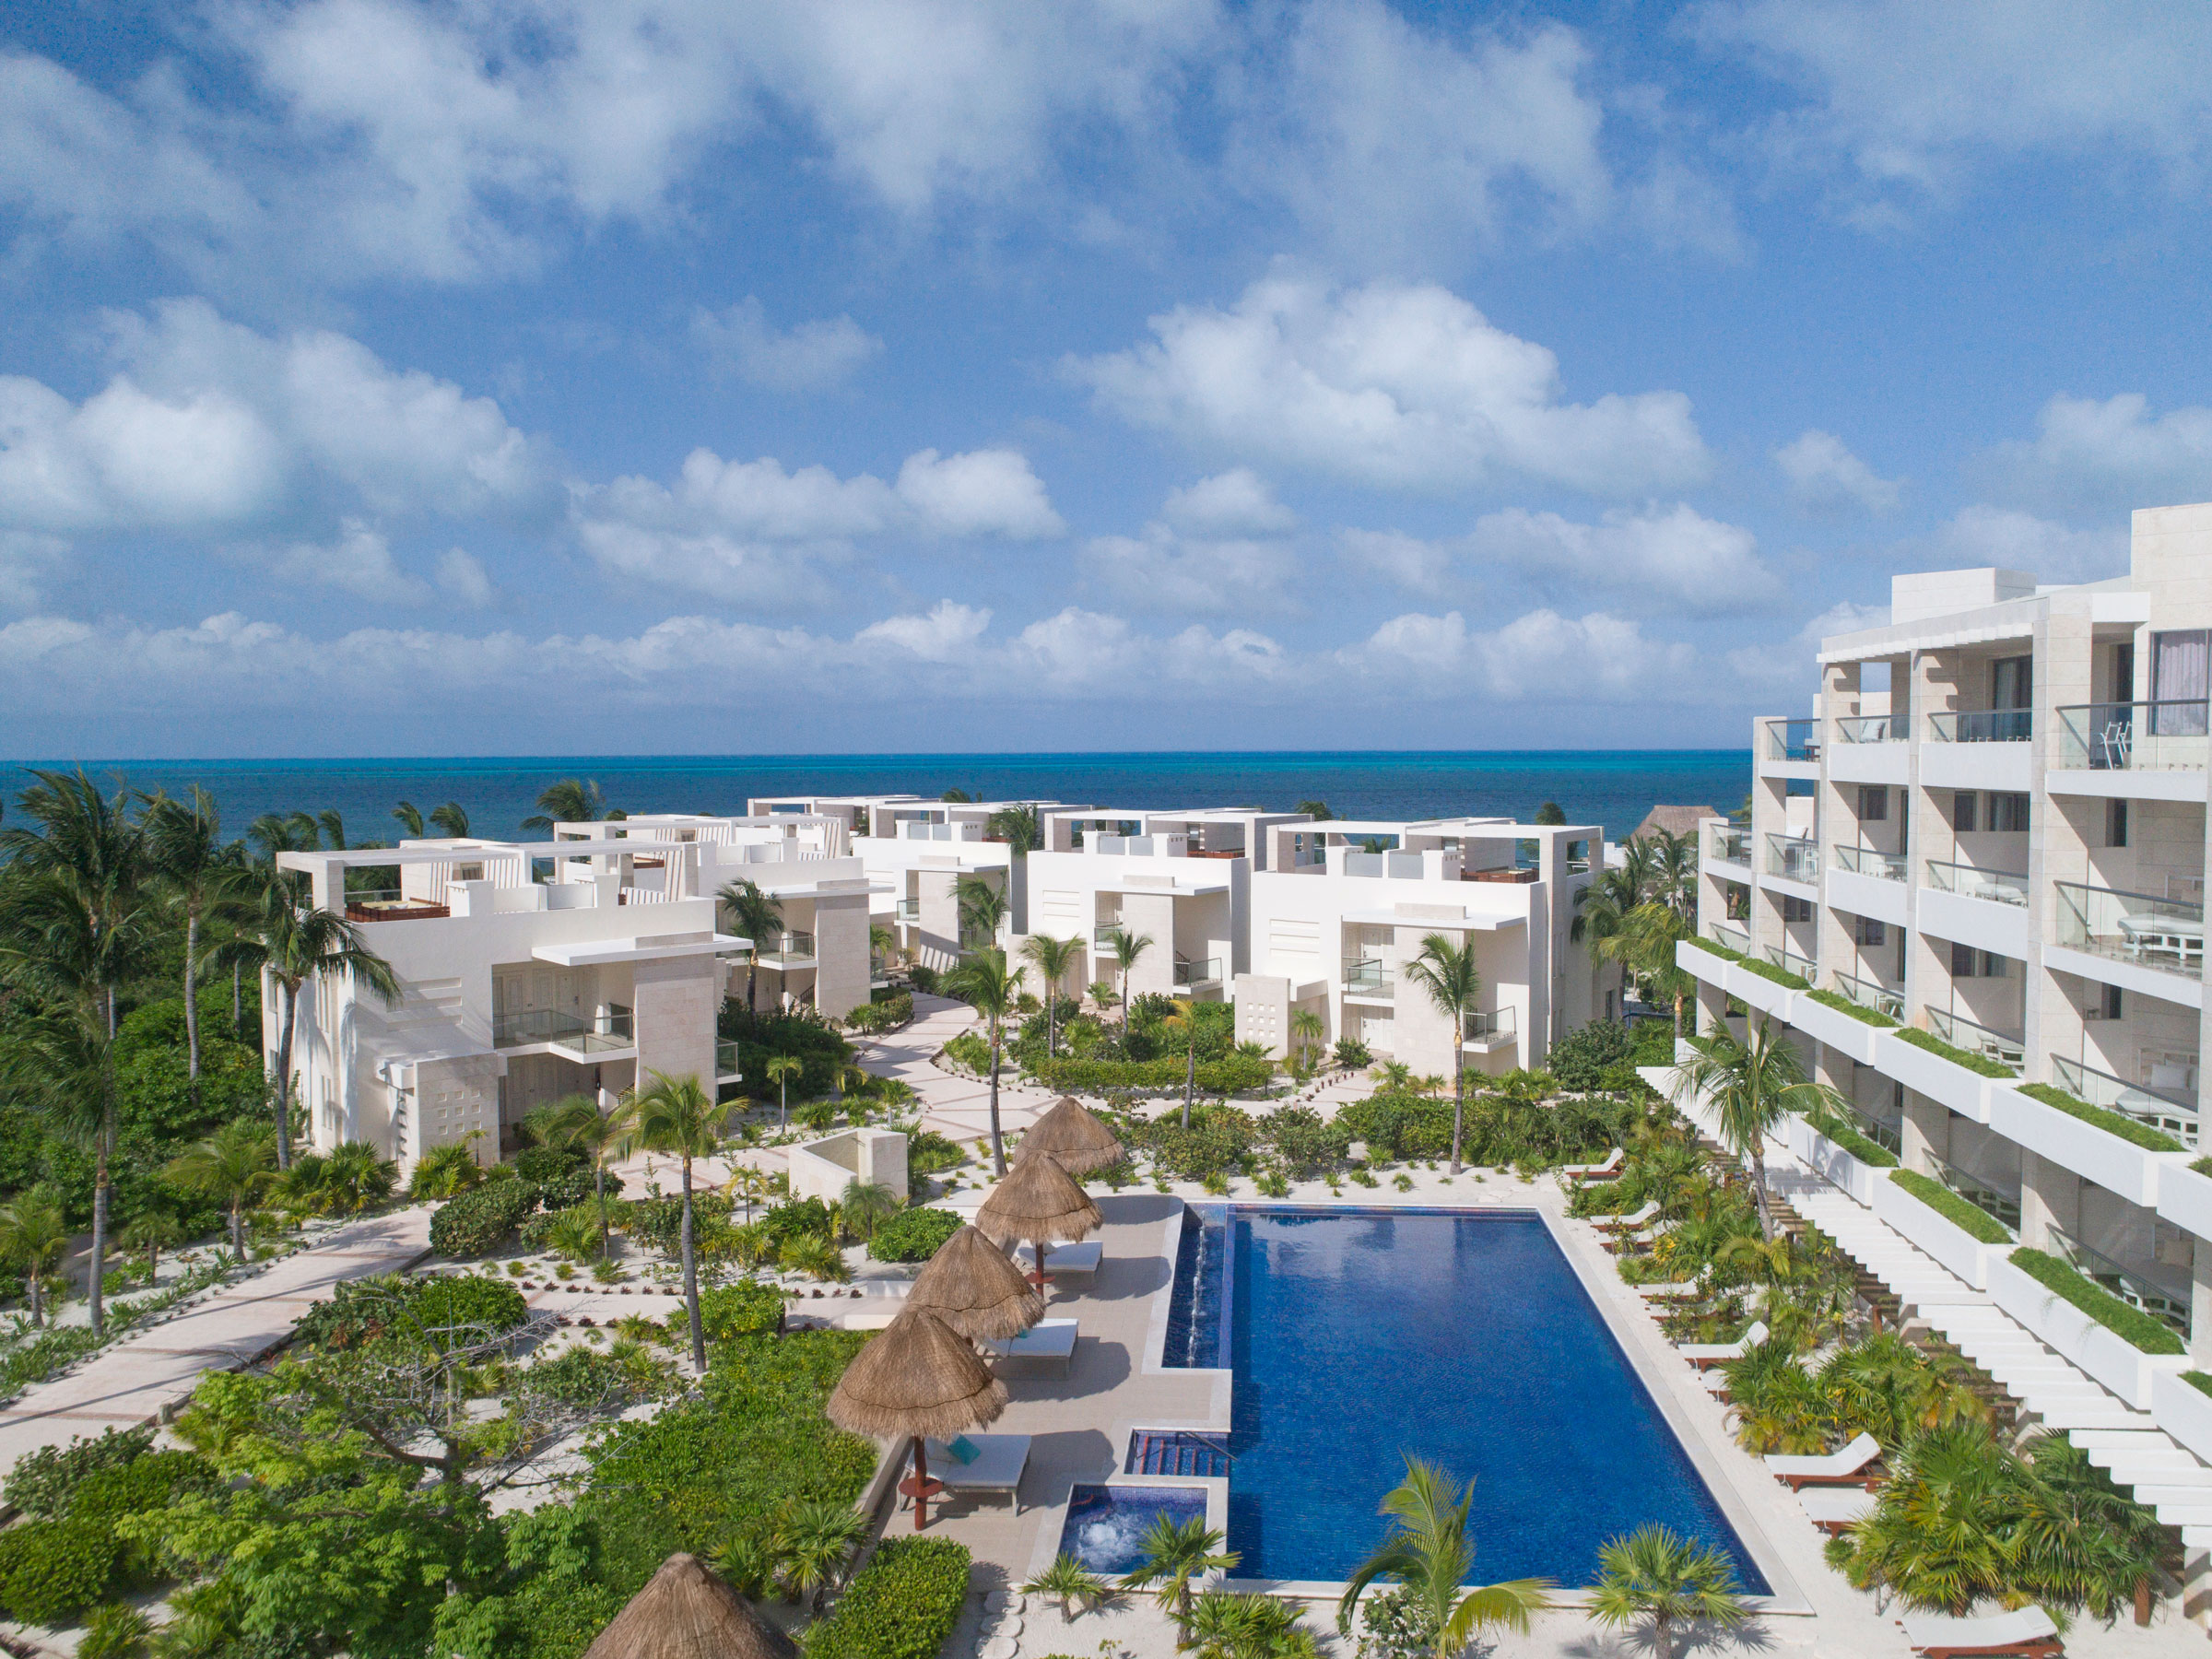 Romantic Luxury Vacation packages in Cancun